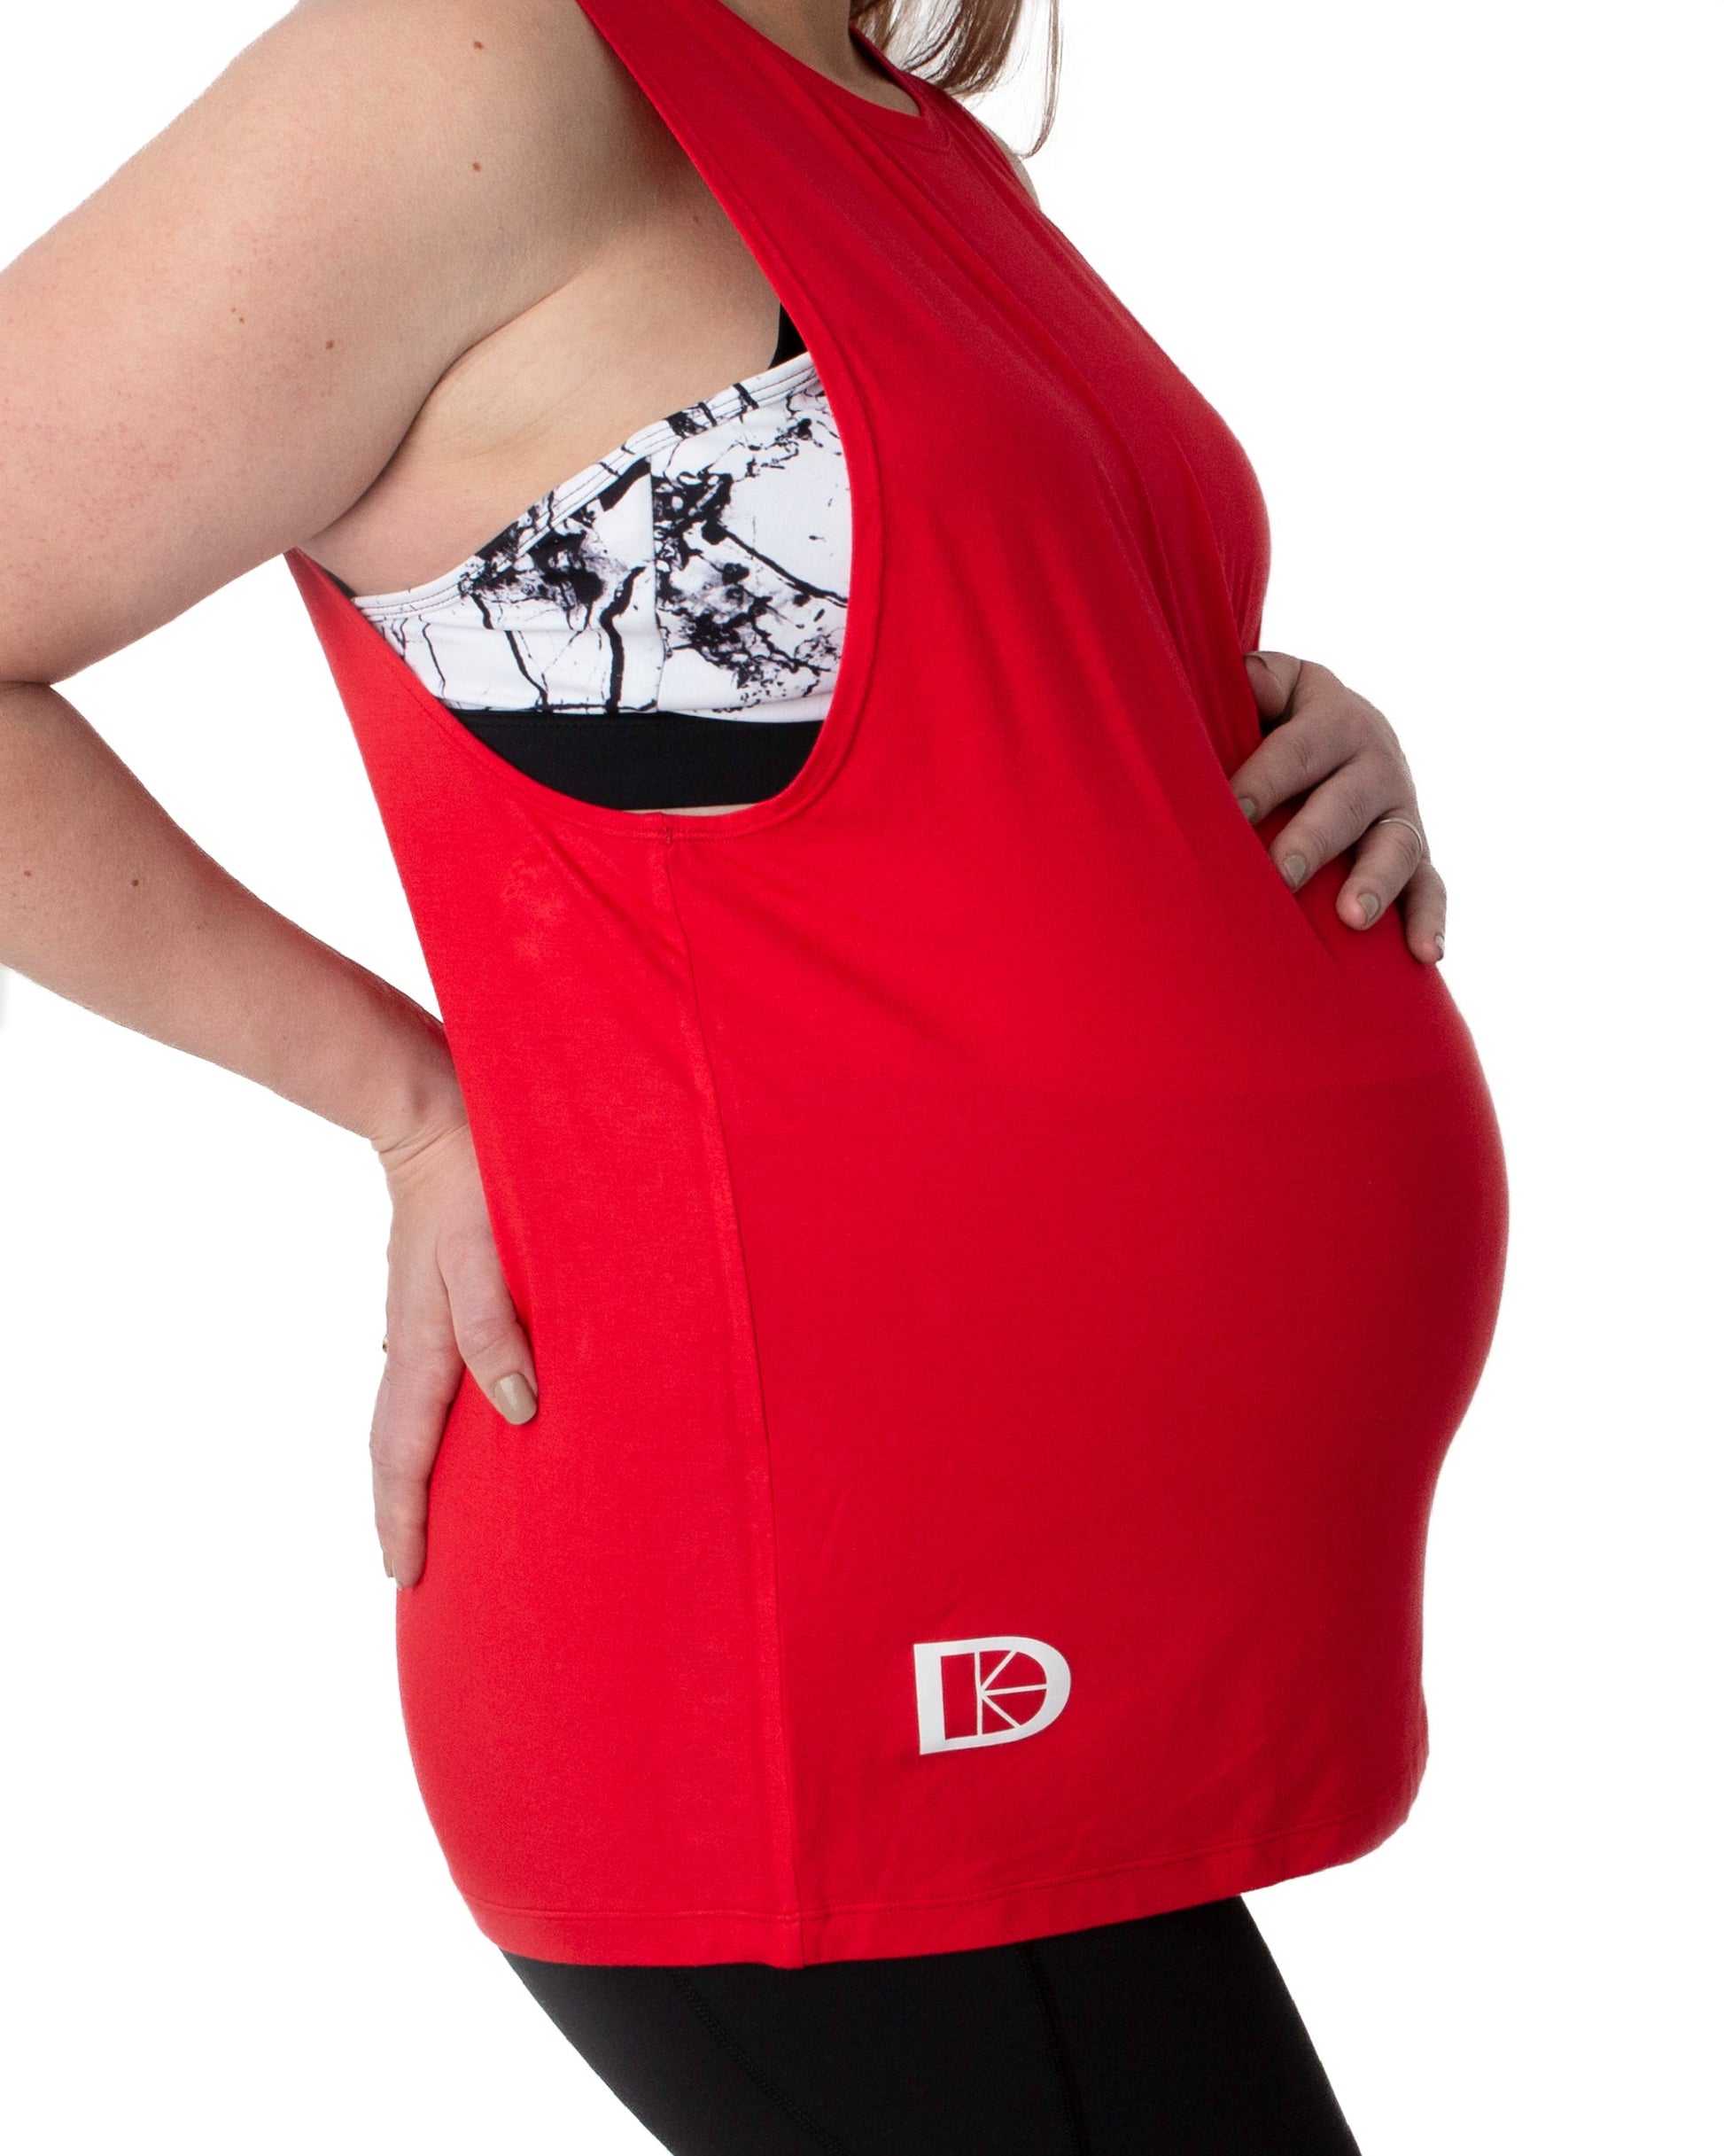 Red maternity vest over bump